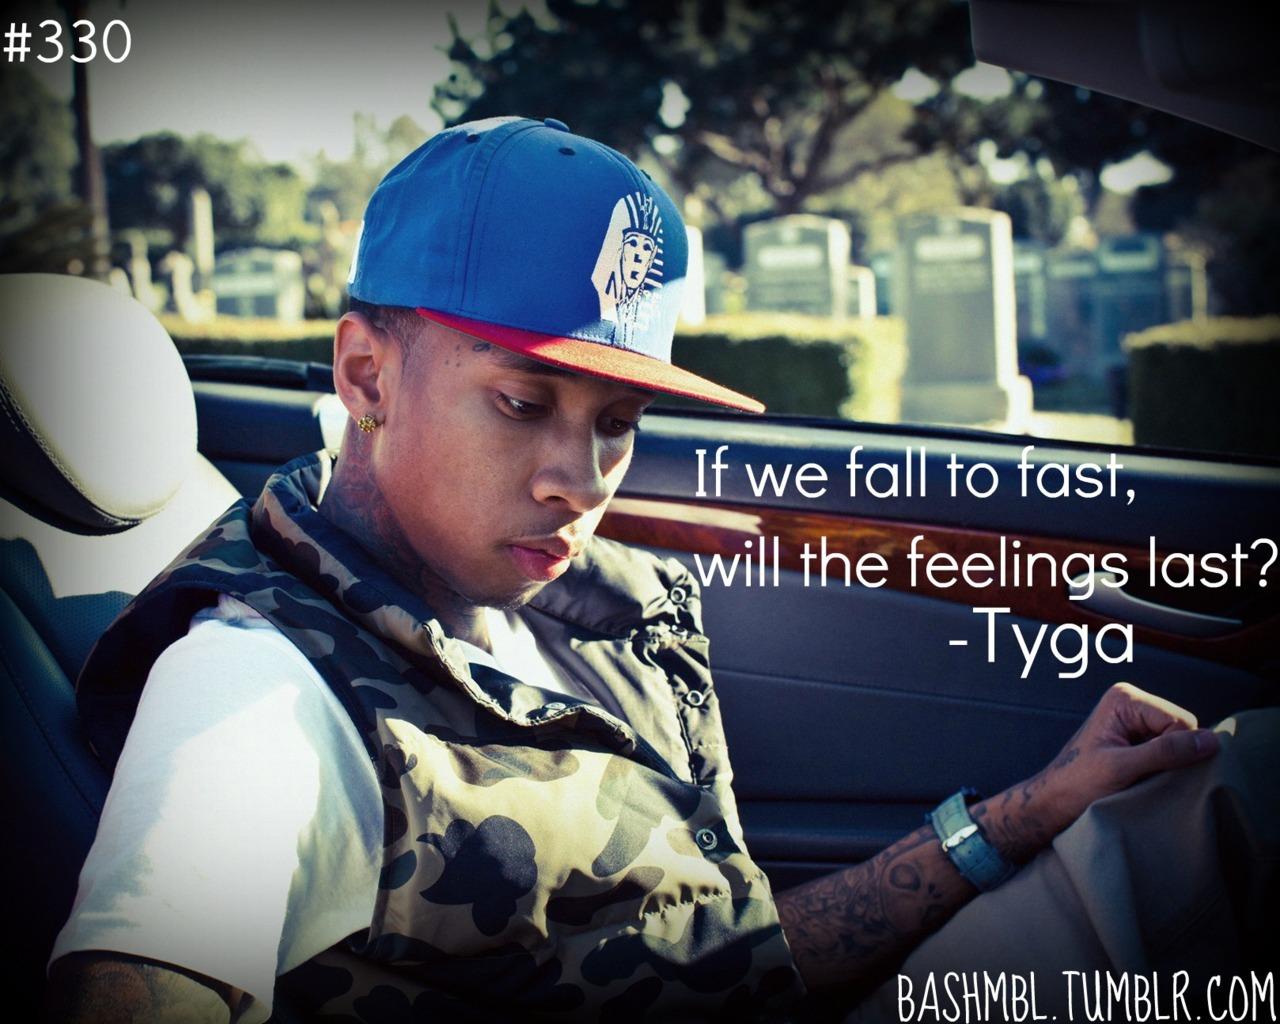 Tyga Sad Love Quotes Tumblr. Love quotes collection within